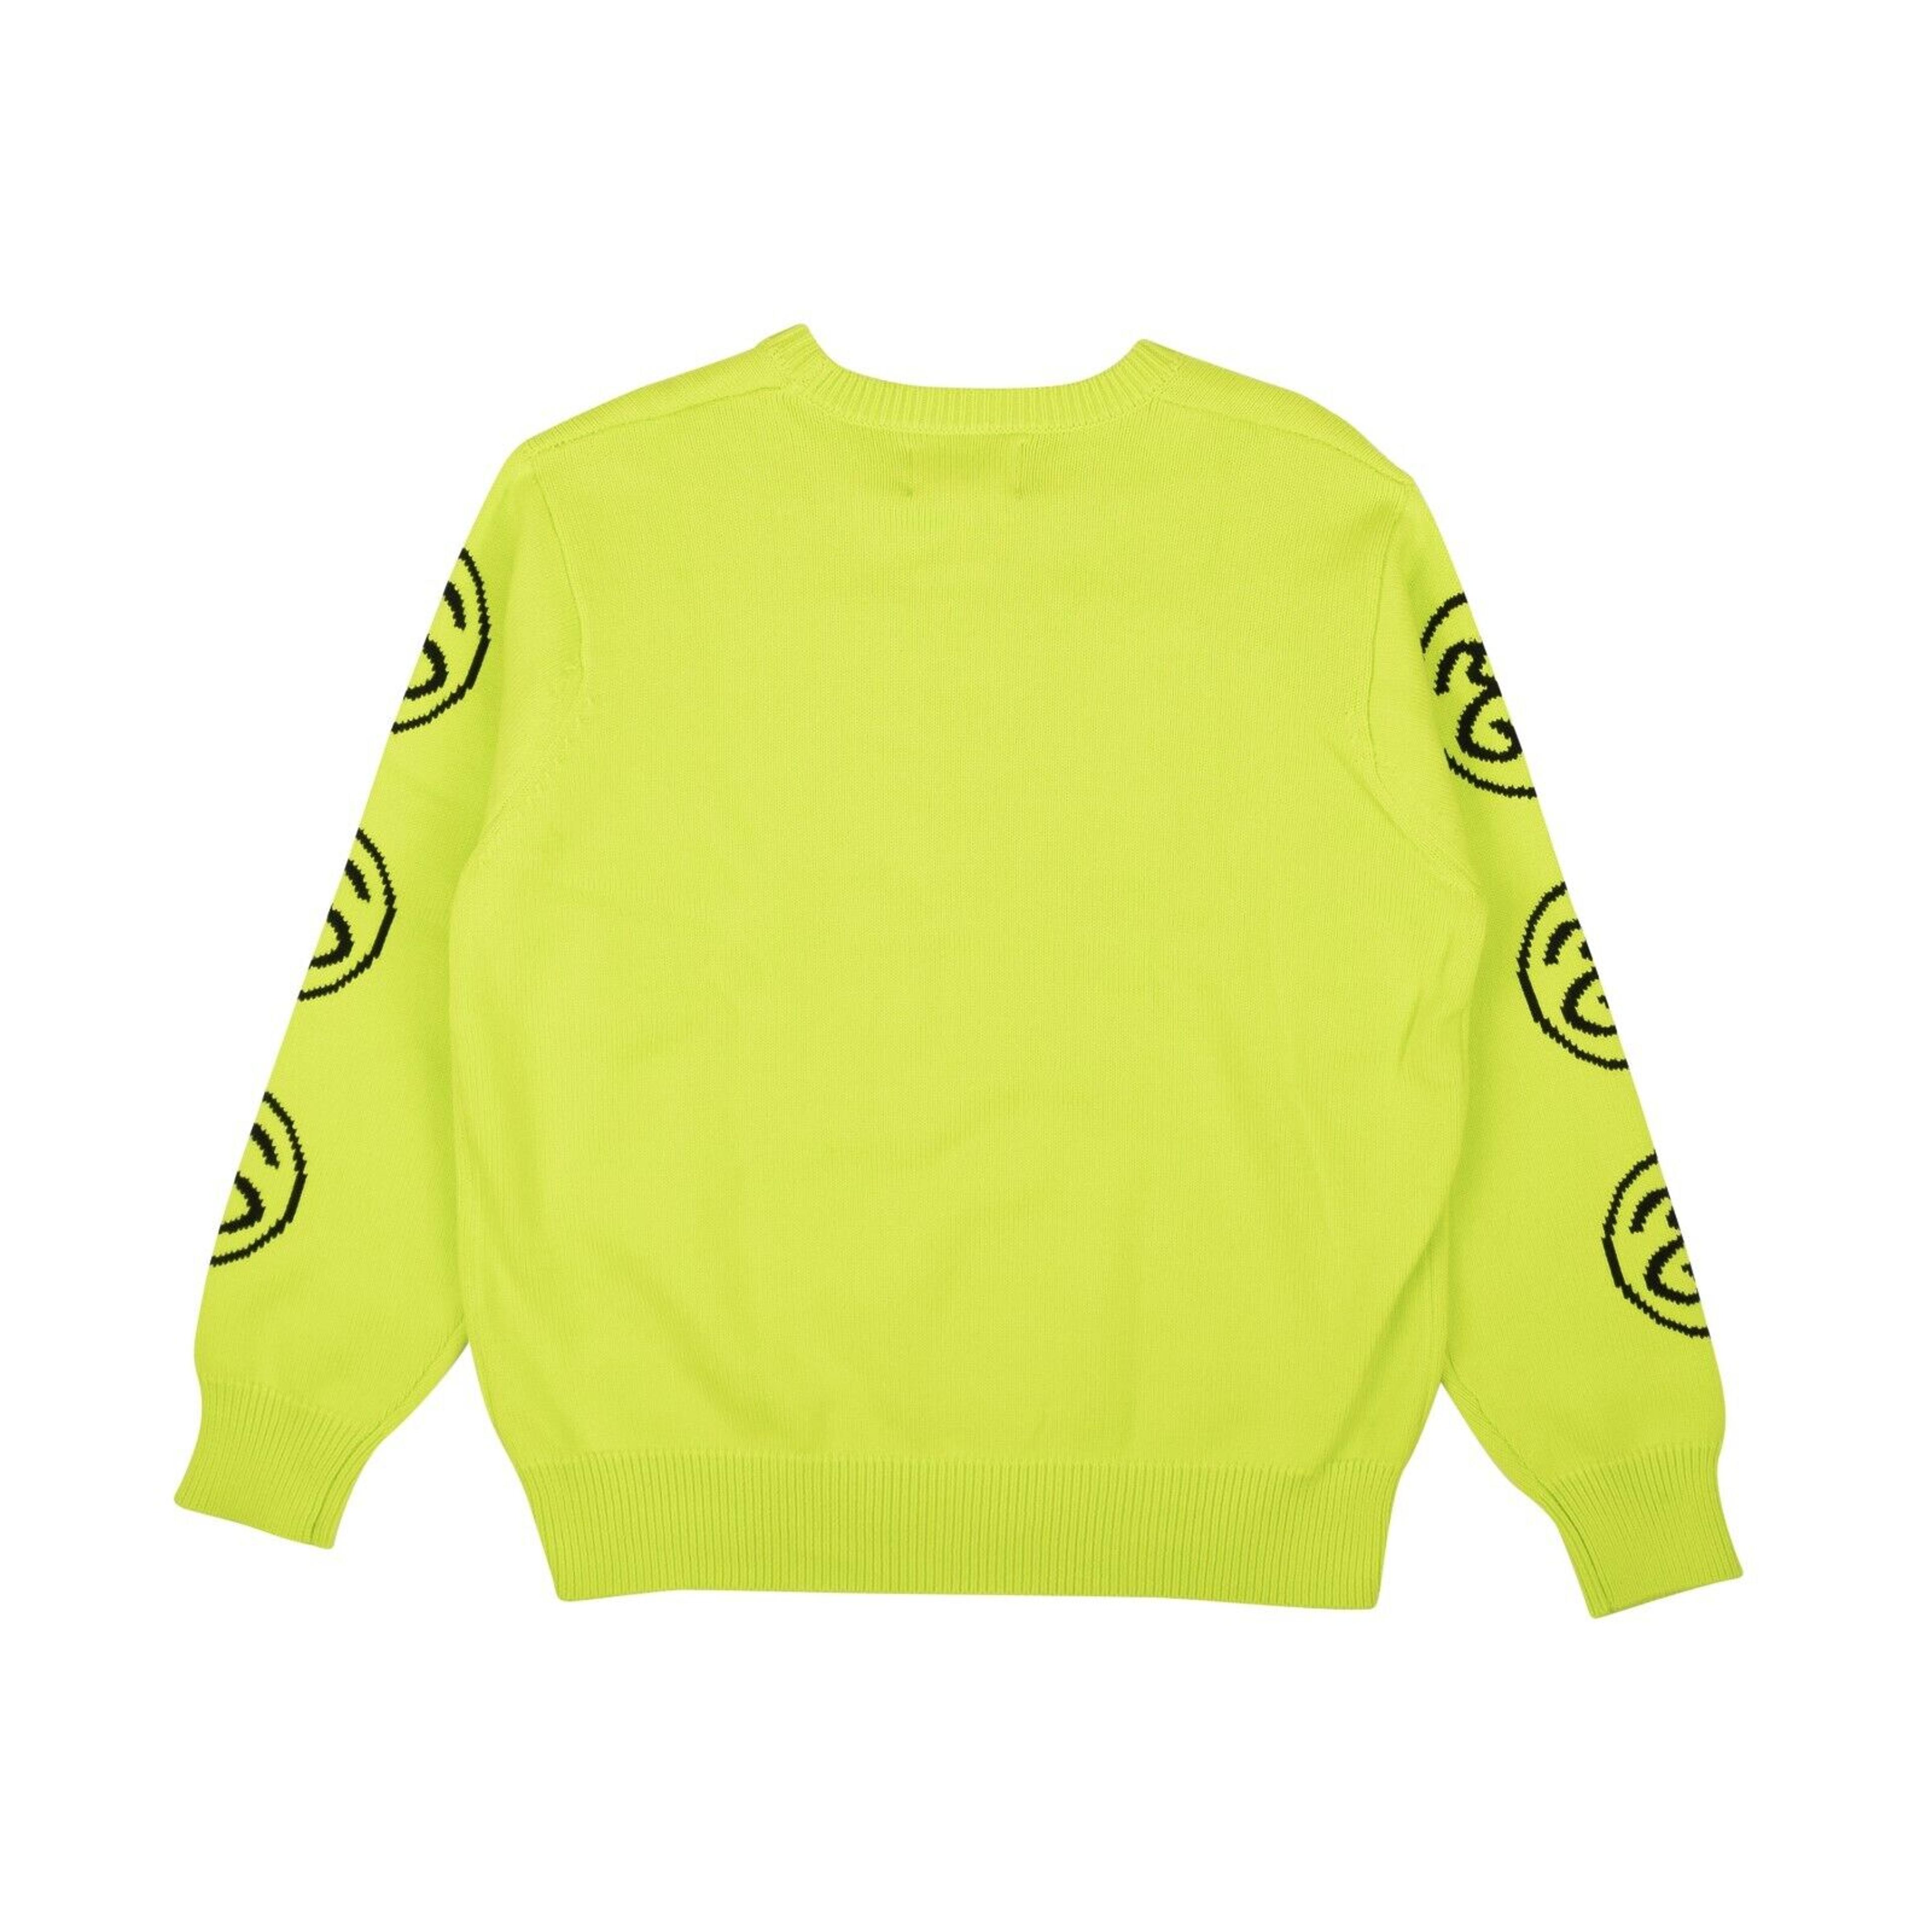 Alternate View 2 of Lime Green Cotton SS-Link Crewneck Sweater